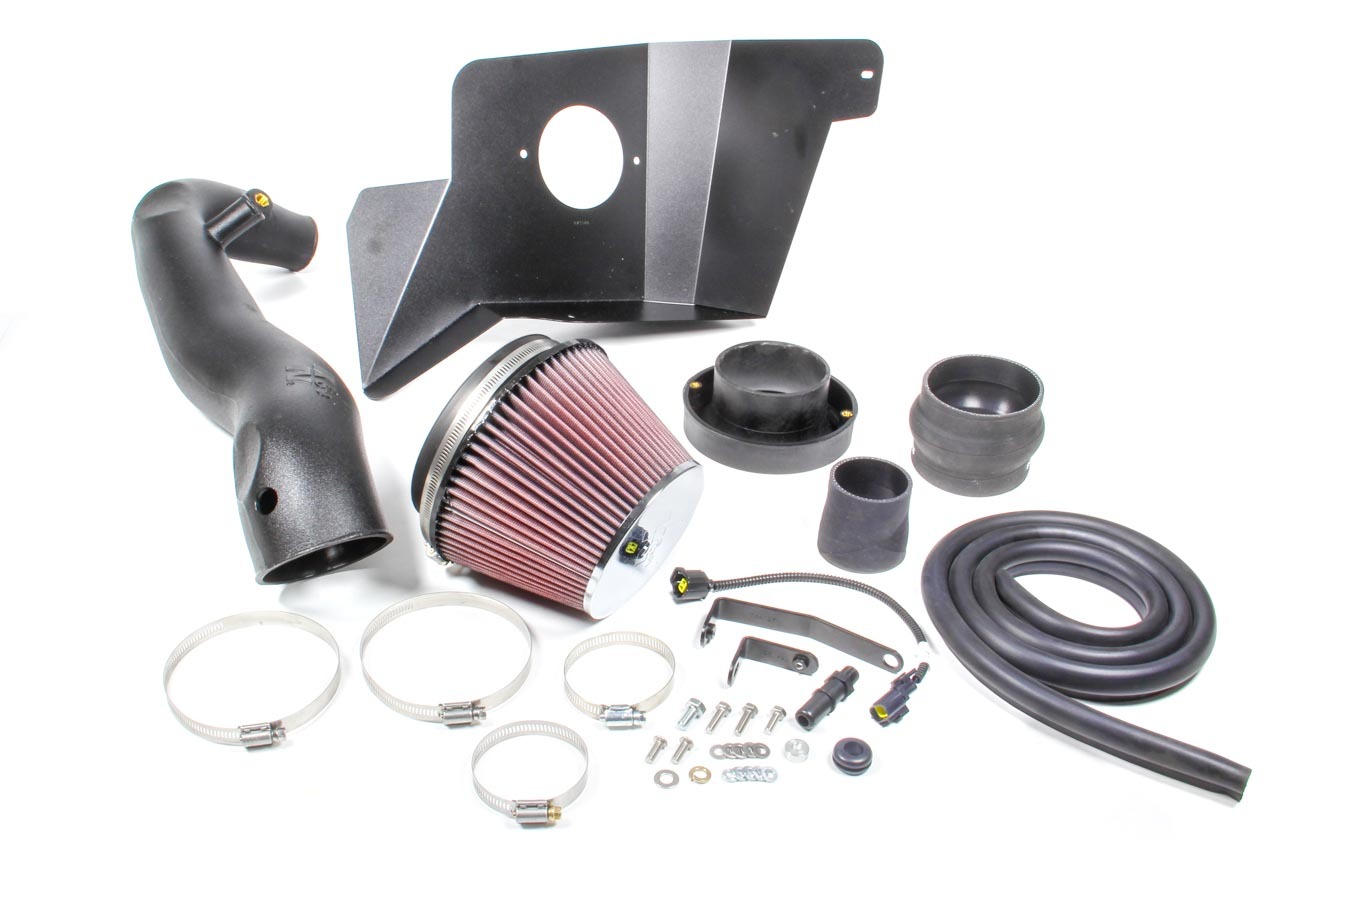 K & N Air Induction System, 63 Series AirCharger, Reusable Filter, Ford EcoBoost 4-Cylinder, Ford Mustang 2015-17, K